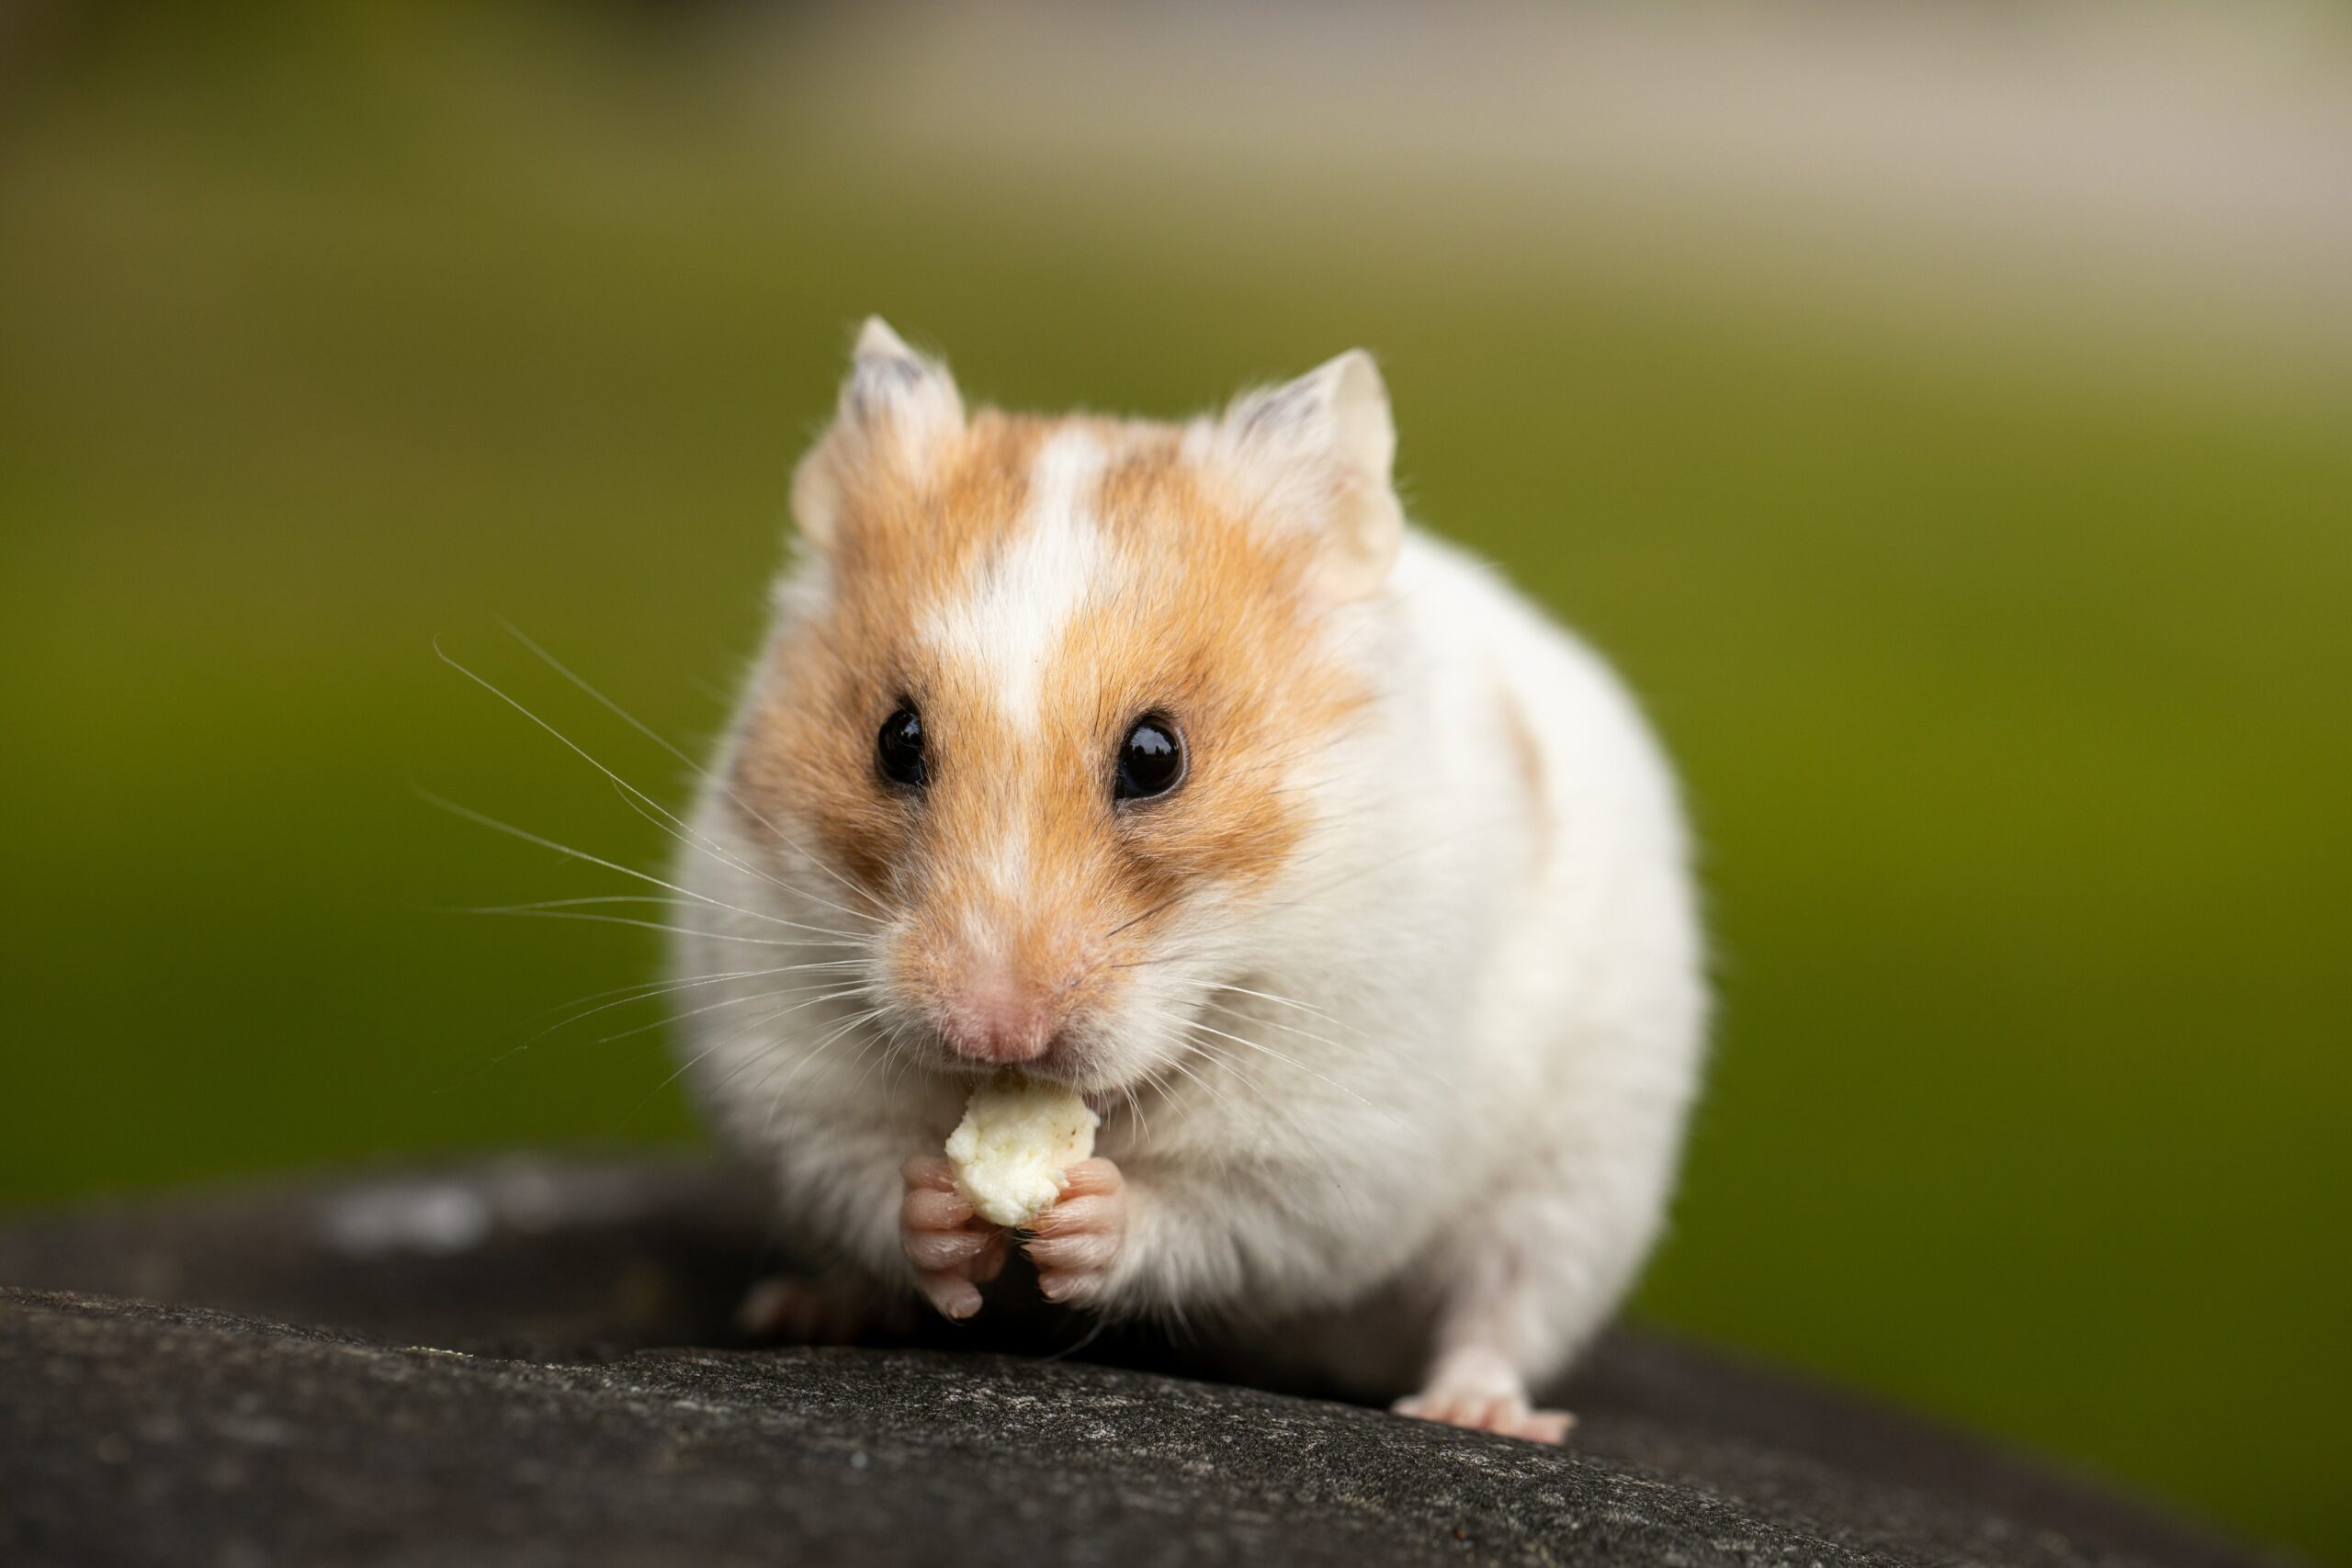 Should You Let a Hamster Out of Its Cage?